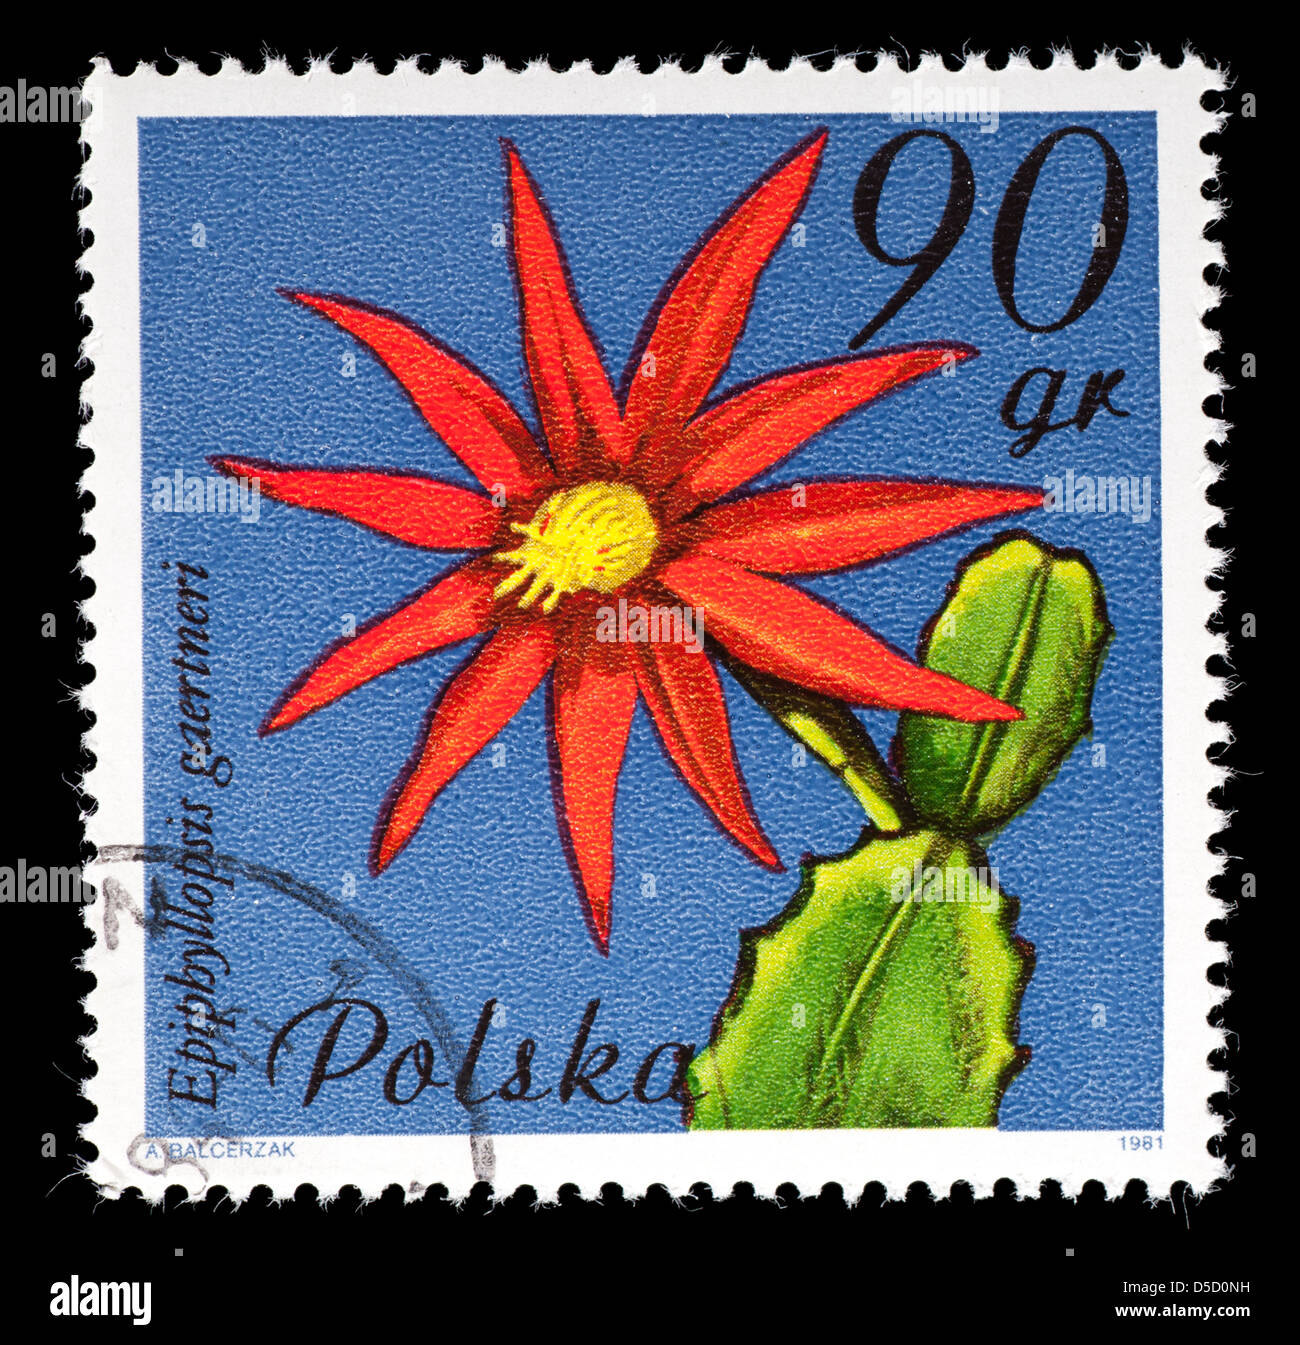 Postage stamp from Poland depicting a cactus flower Hatiora gaertner Stock Photo